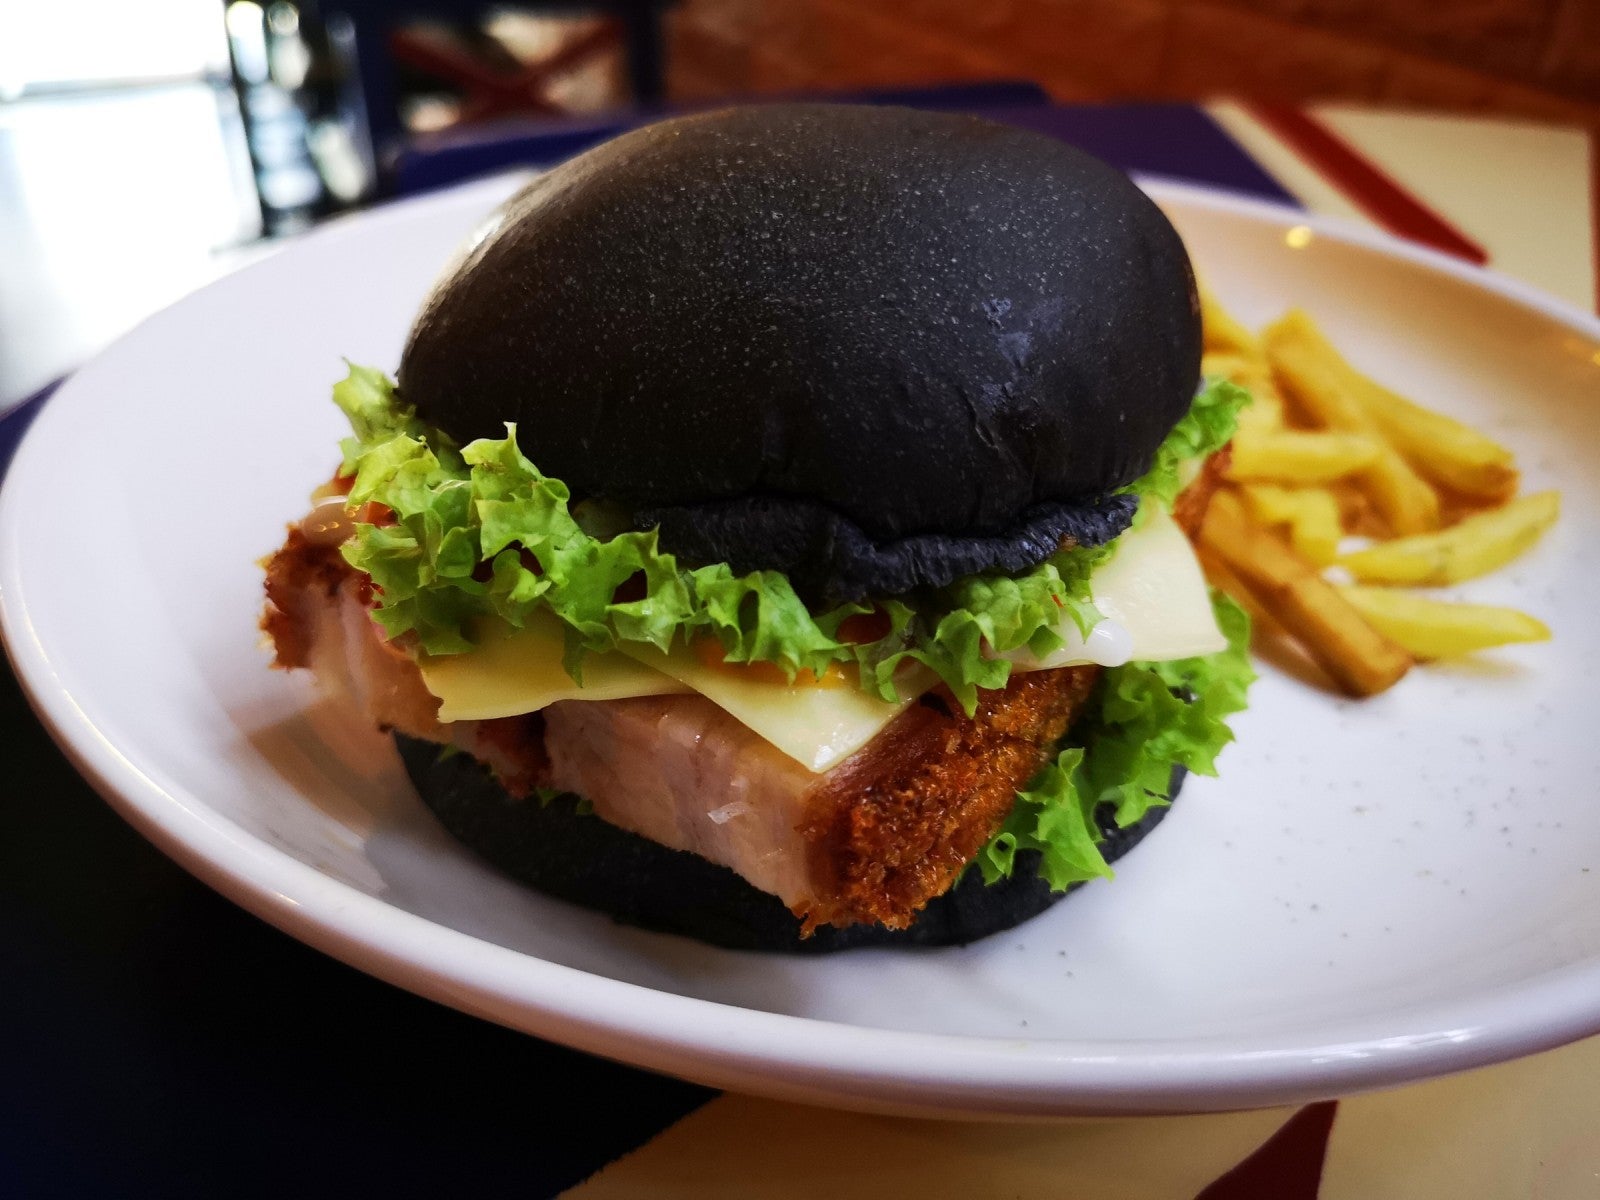 This Cafe In Penang Has A Crispy Pork Belly Birthday &Quot;Cake&Quot; And We're Drooling! - World Of Buzz 6